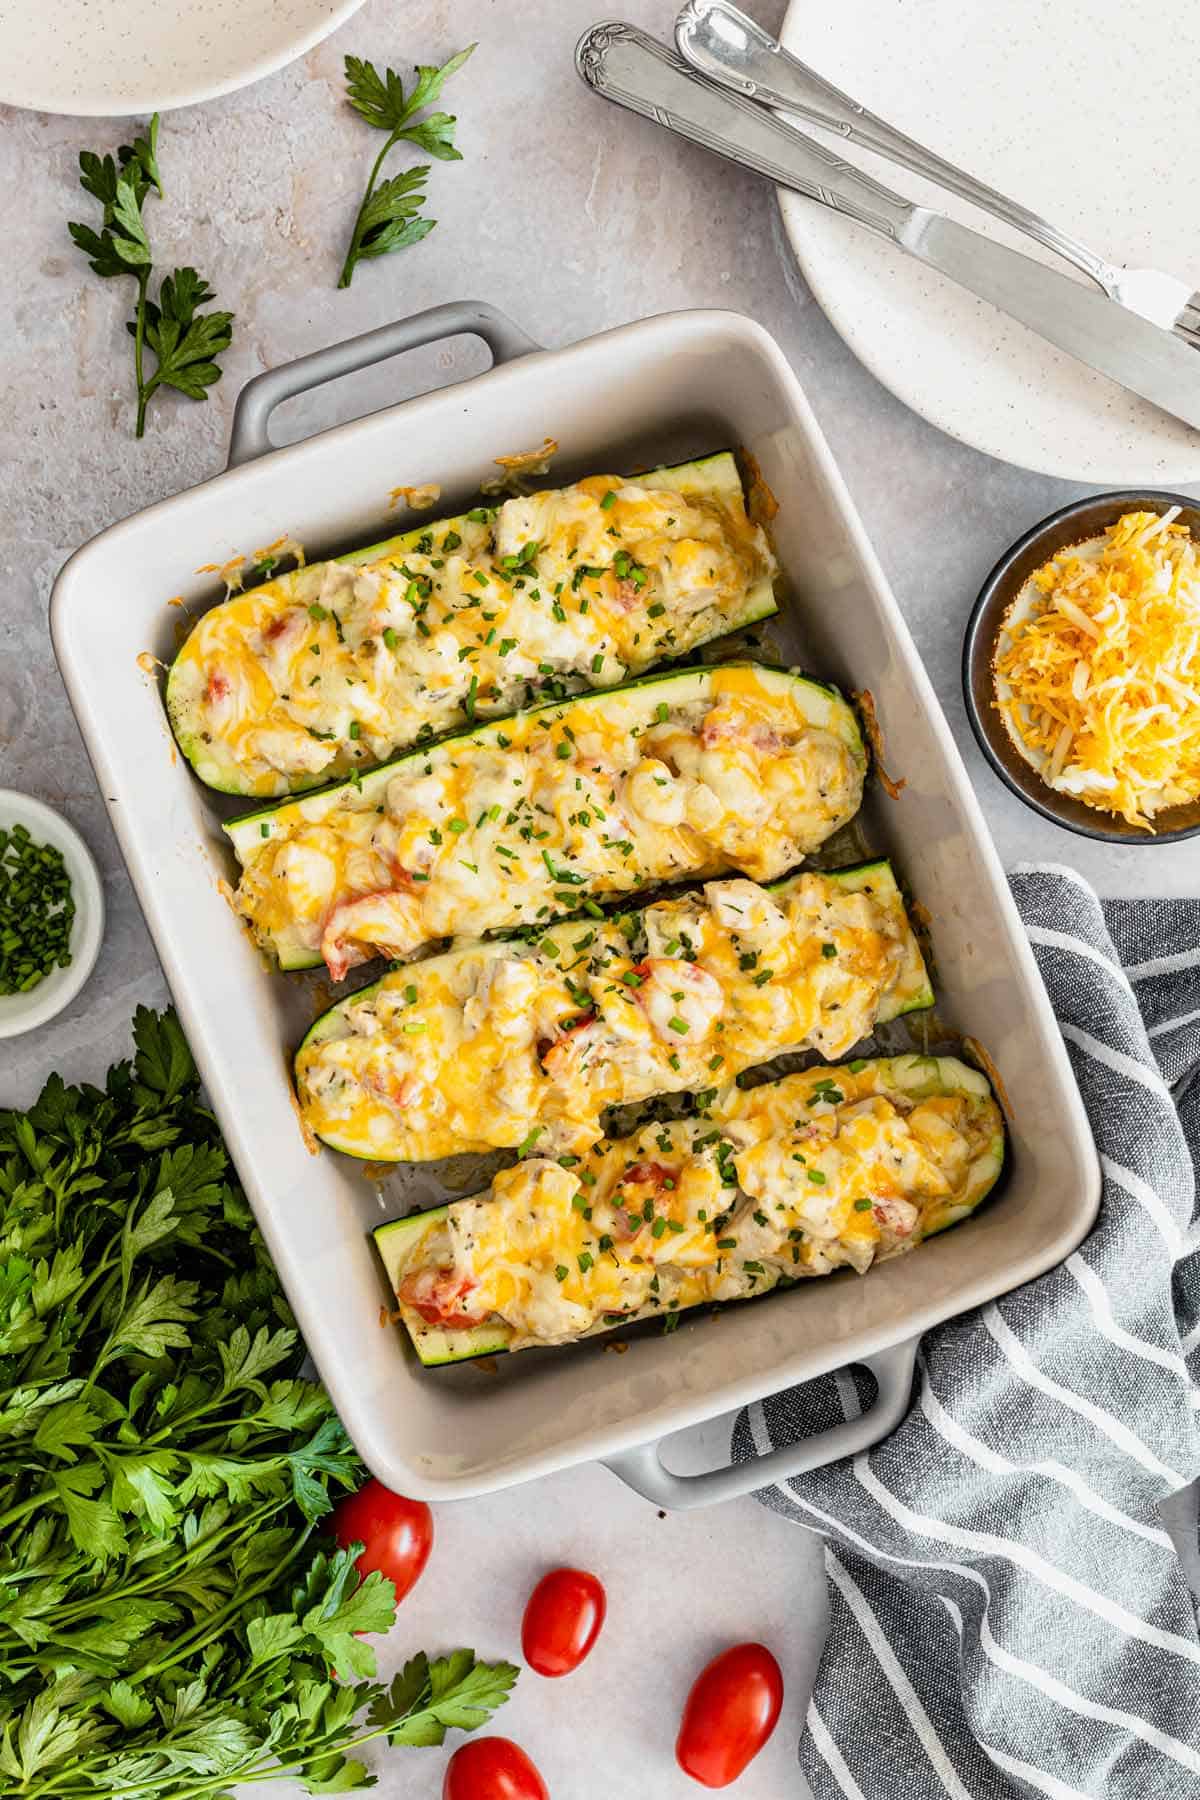 Stuffed zucchini boats filled with chicken parmesan and colby jack cheese in a white baking dish.